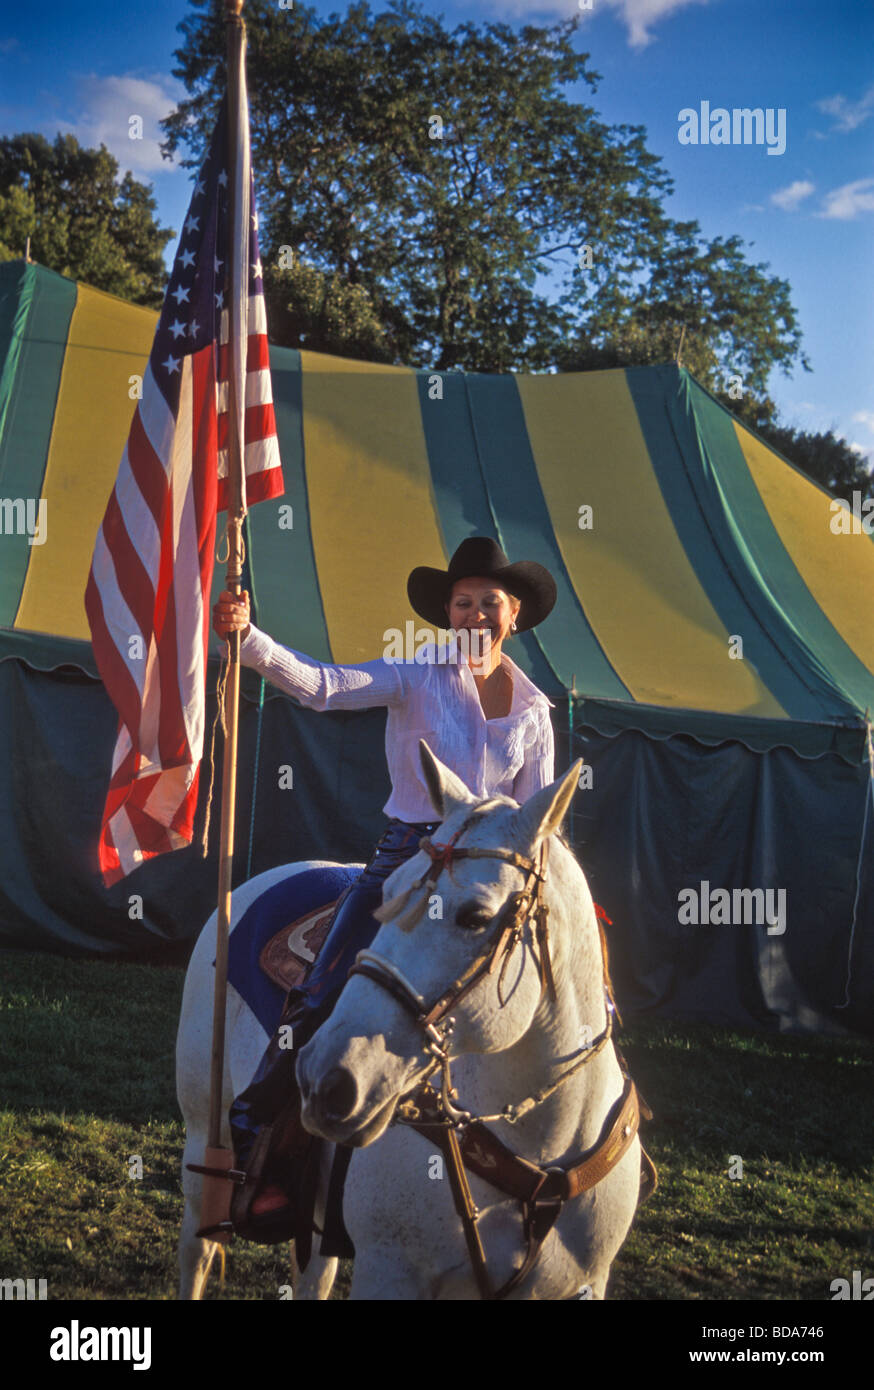 Young woman on white horse carries American flag at opening ceremony of county fair rodeo Stock Photo